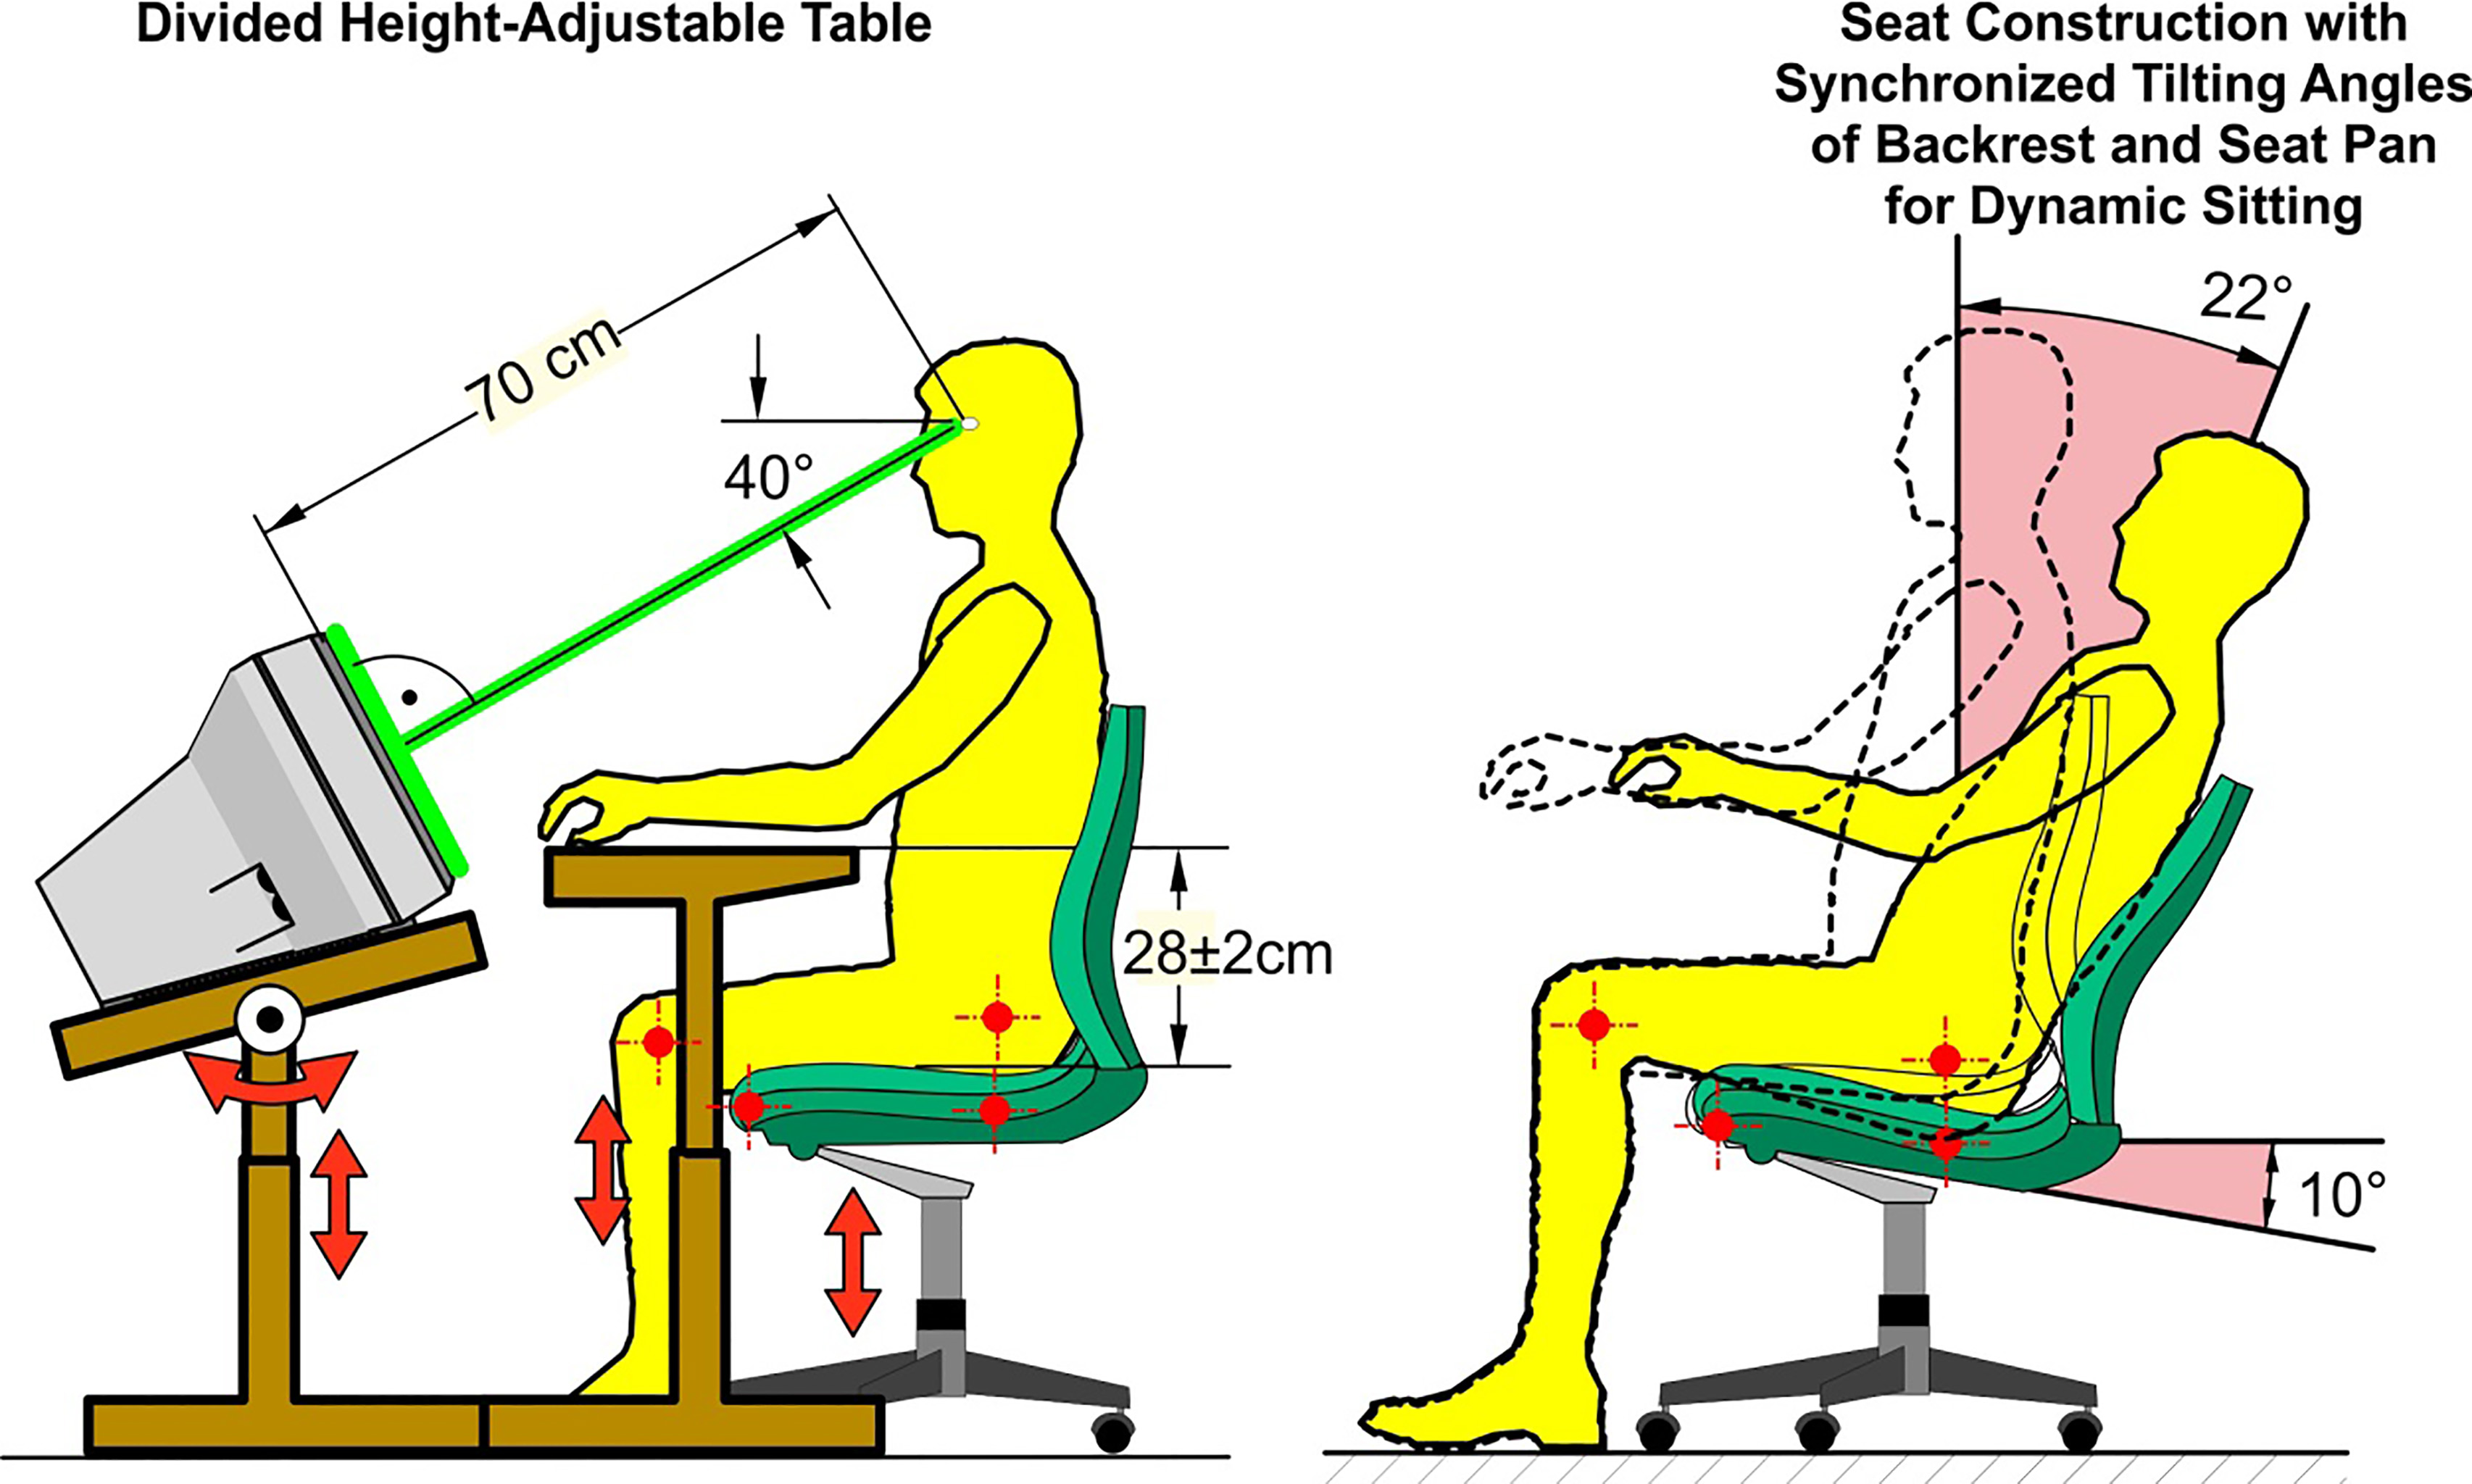 Divided height-adjustable table for the individual adaptation to manual and visual working height enabling an orthogonal top view and a suitable viewing distance (left part) and compatibility between the anatomical knee and hip joints and the functional joints of the seat pan and backrest in chairs with synchronous technique (right part).